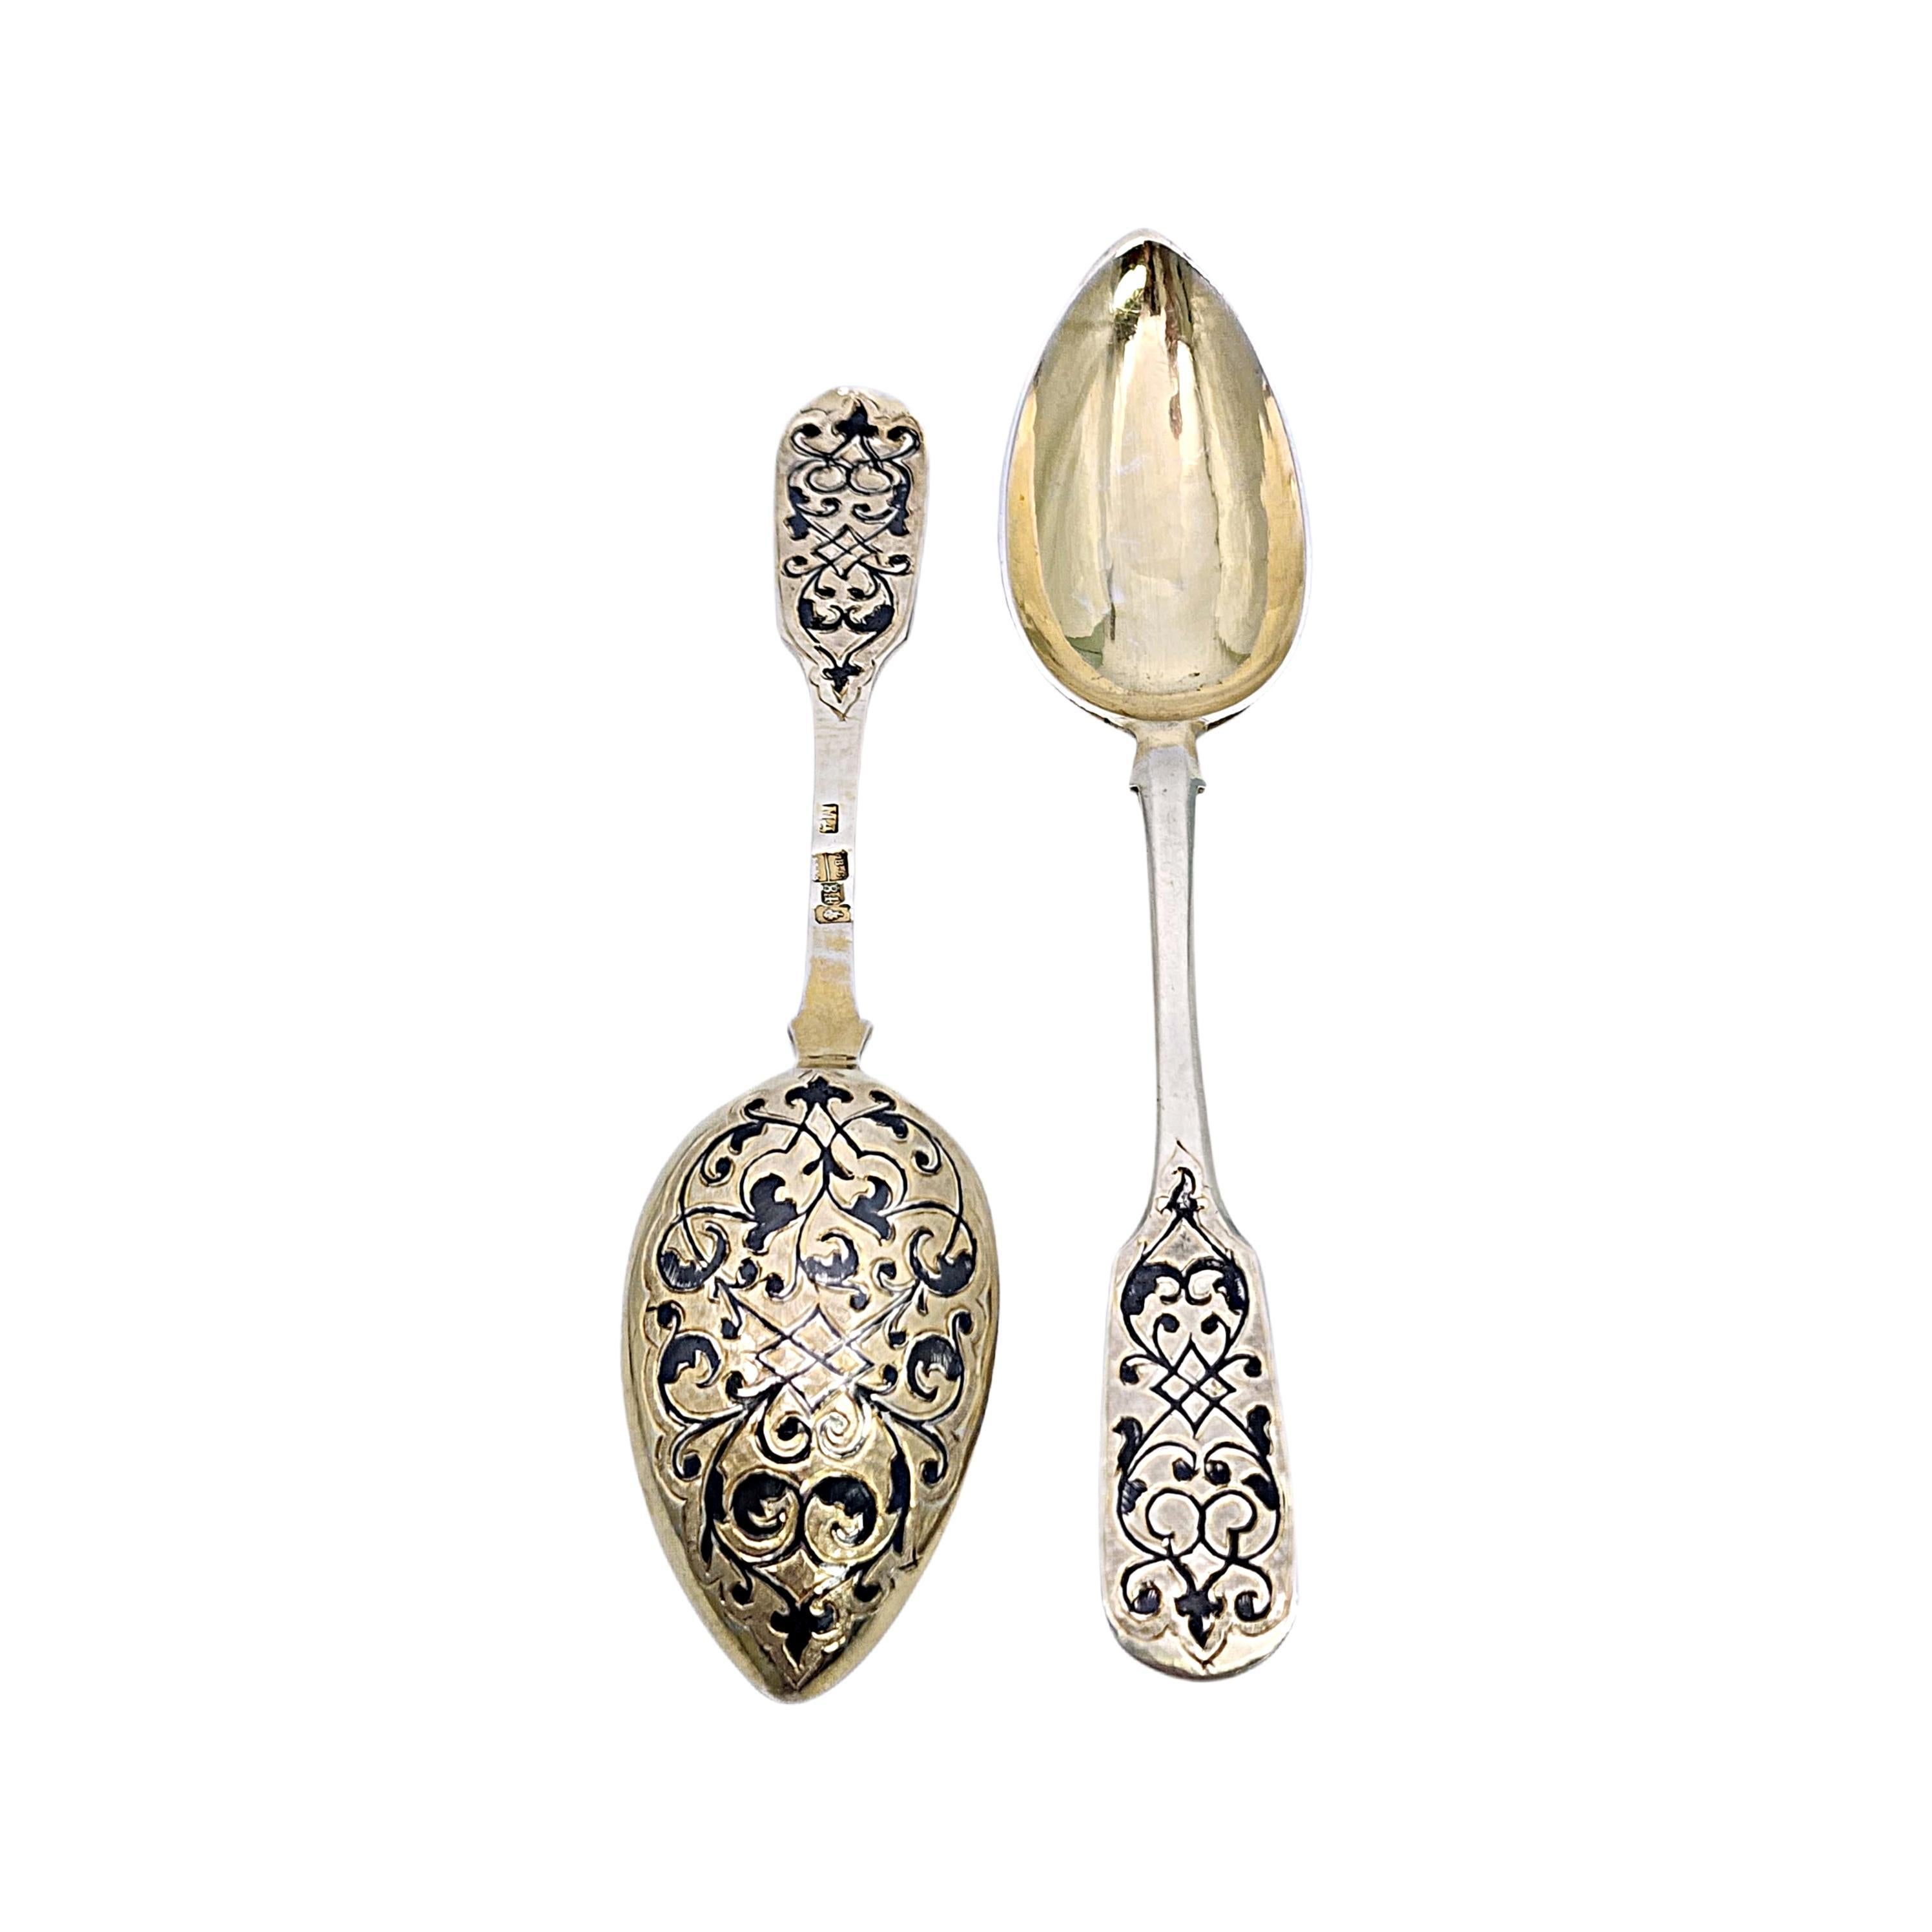 Set of 2 Russian Imperial silver gold wash and enamel spoons.

A pair of Russian spoons made of 84 zolotnik silver, which is .875 purity. They feature pointed gold wash bowls with an intricate enamel design on the back of the bowls with a matching